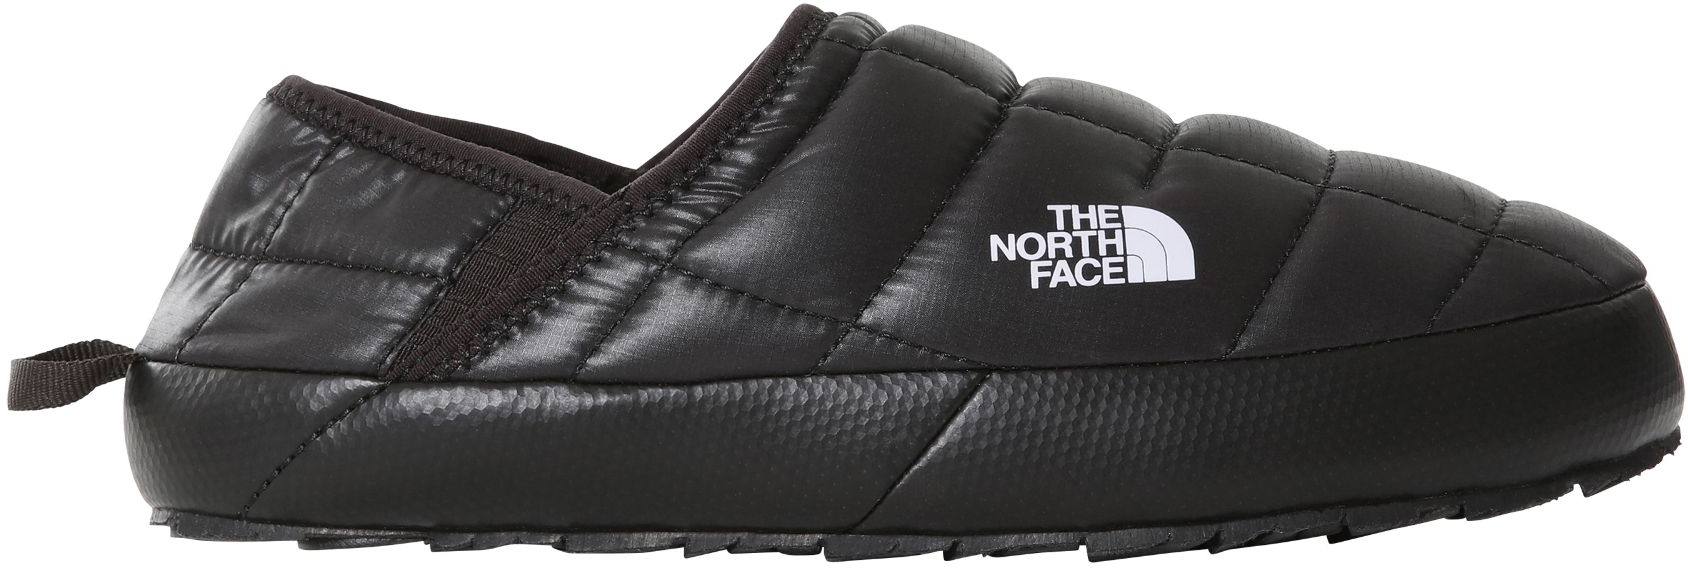 The North Face Women’s Thermoball Traction Mule V